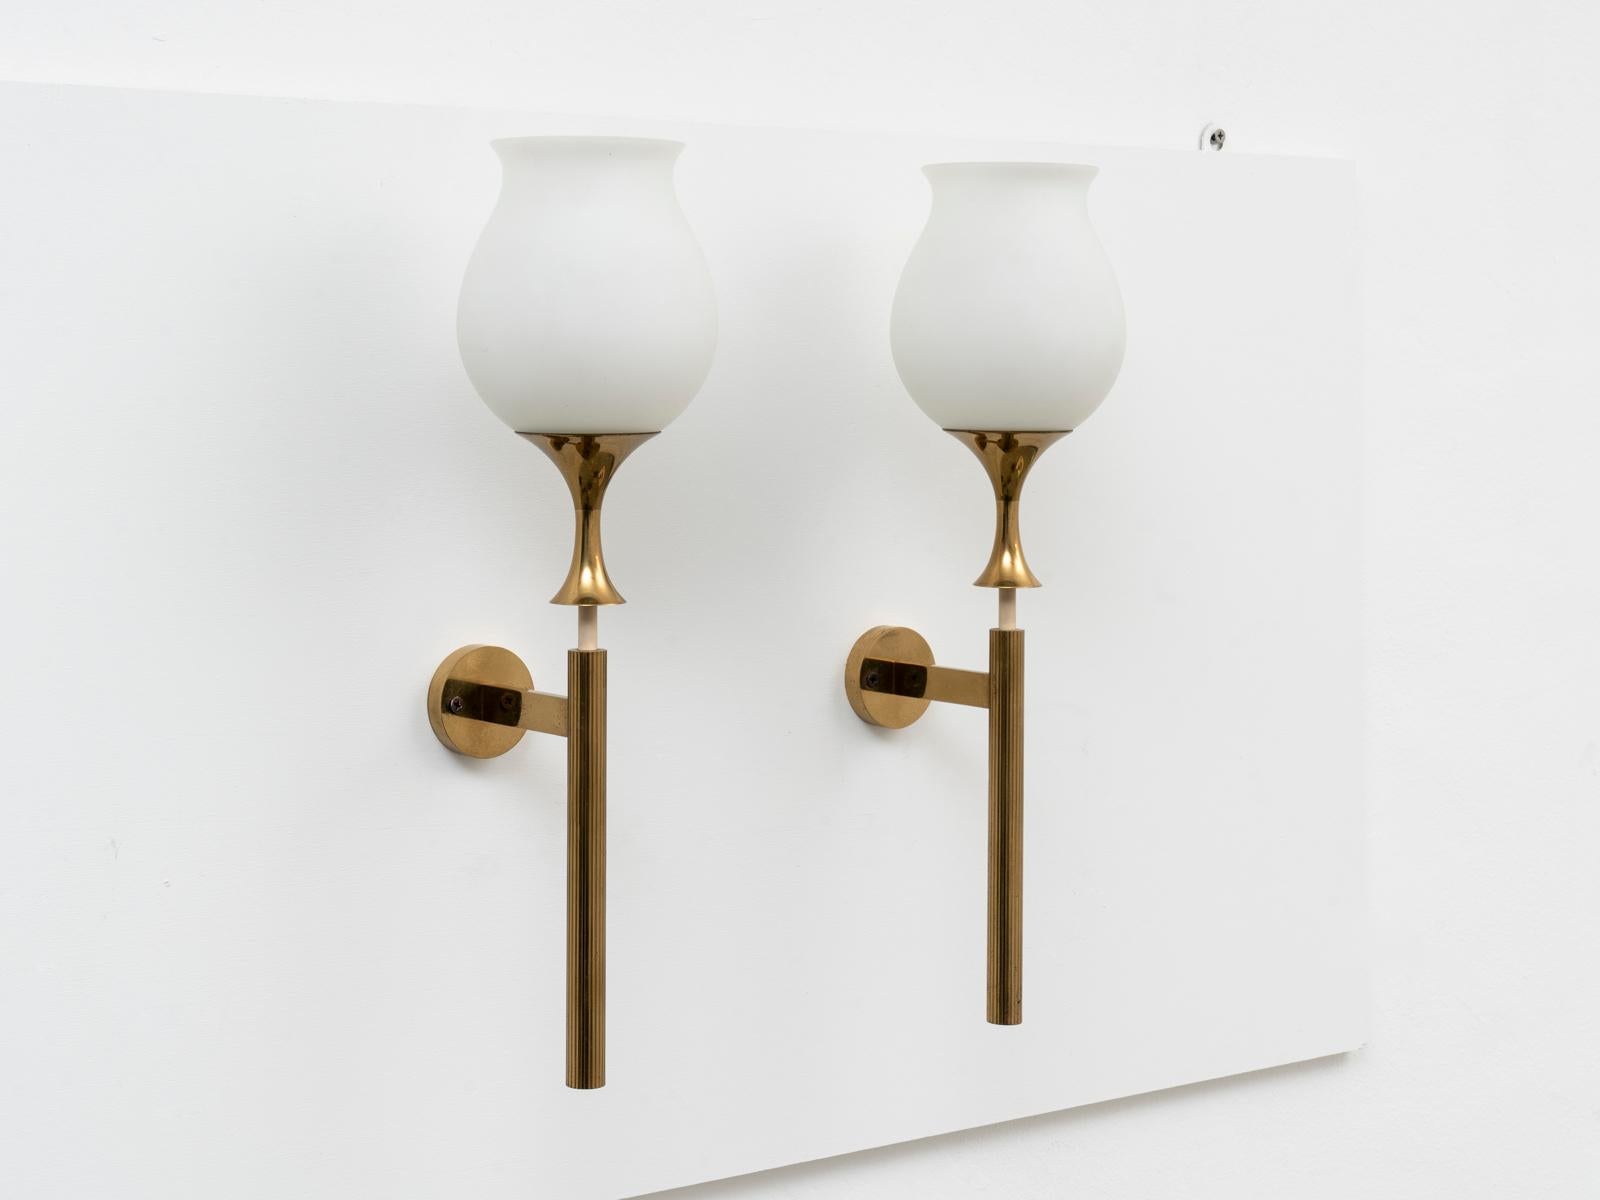 This pair of wall lights was designed by Italian lighting master Angelo Lelii (also known as Lelli) for Arredoluce in 1956. They are made of a polished brass structure with duplex-opal glass shades. They mount a E27 lightbulb each and could be